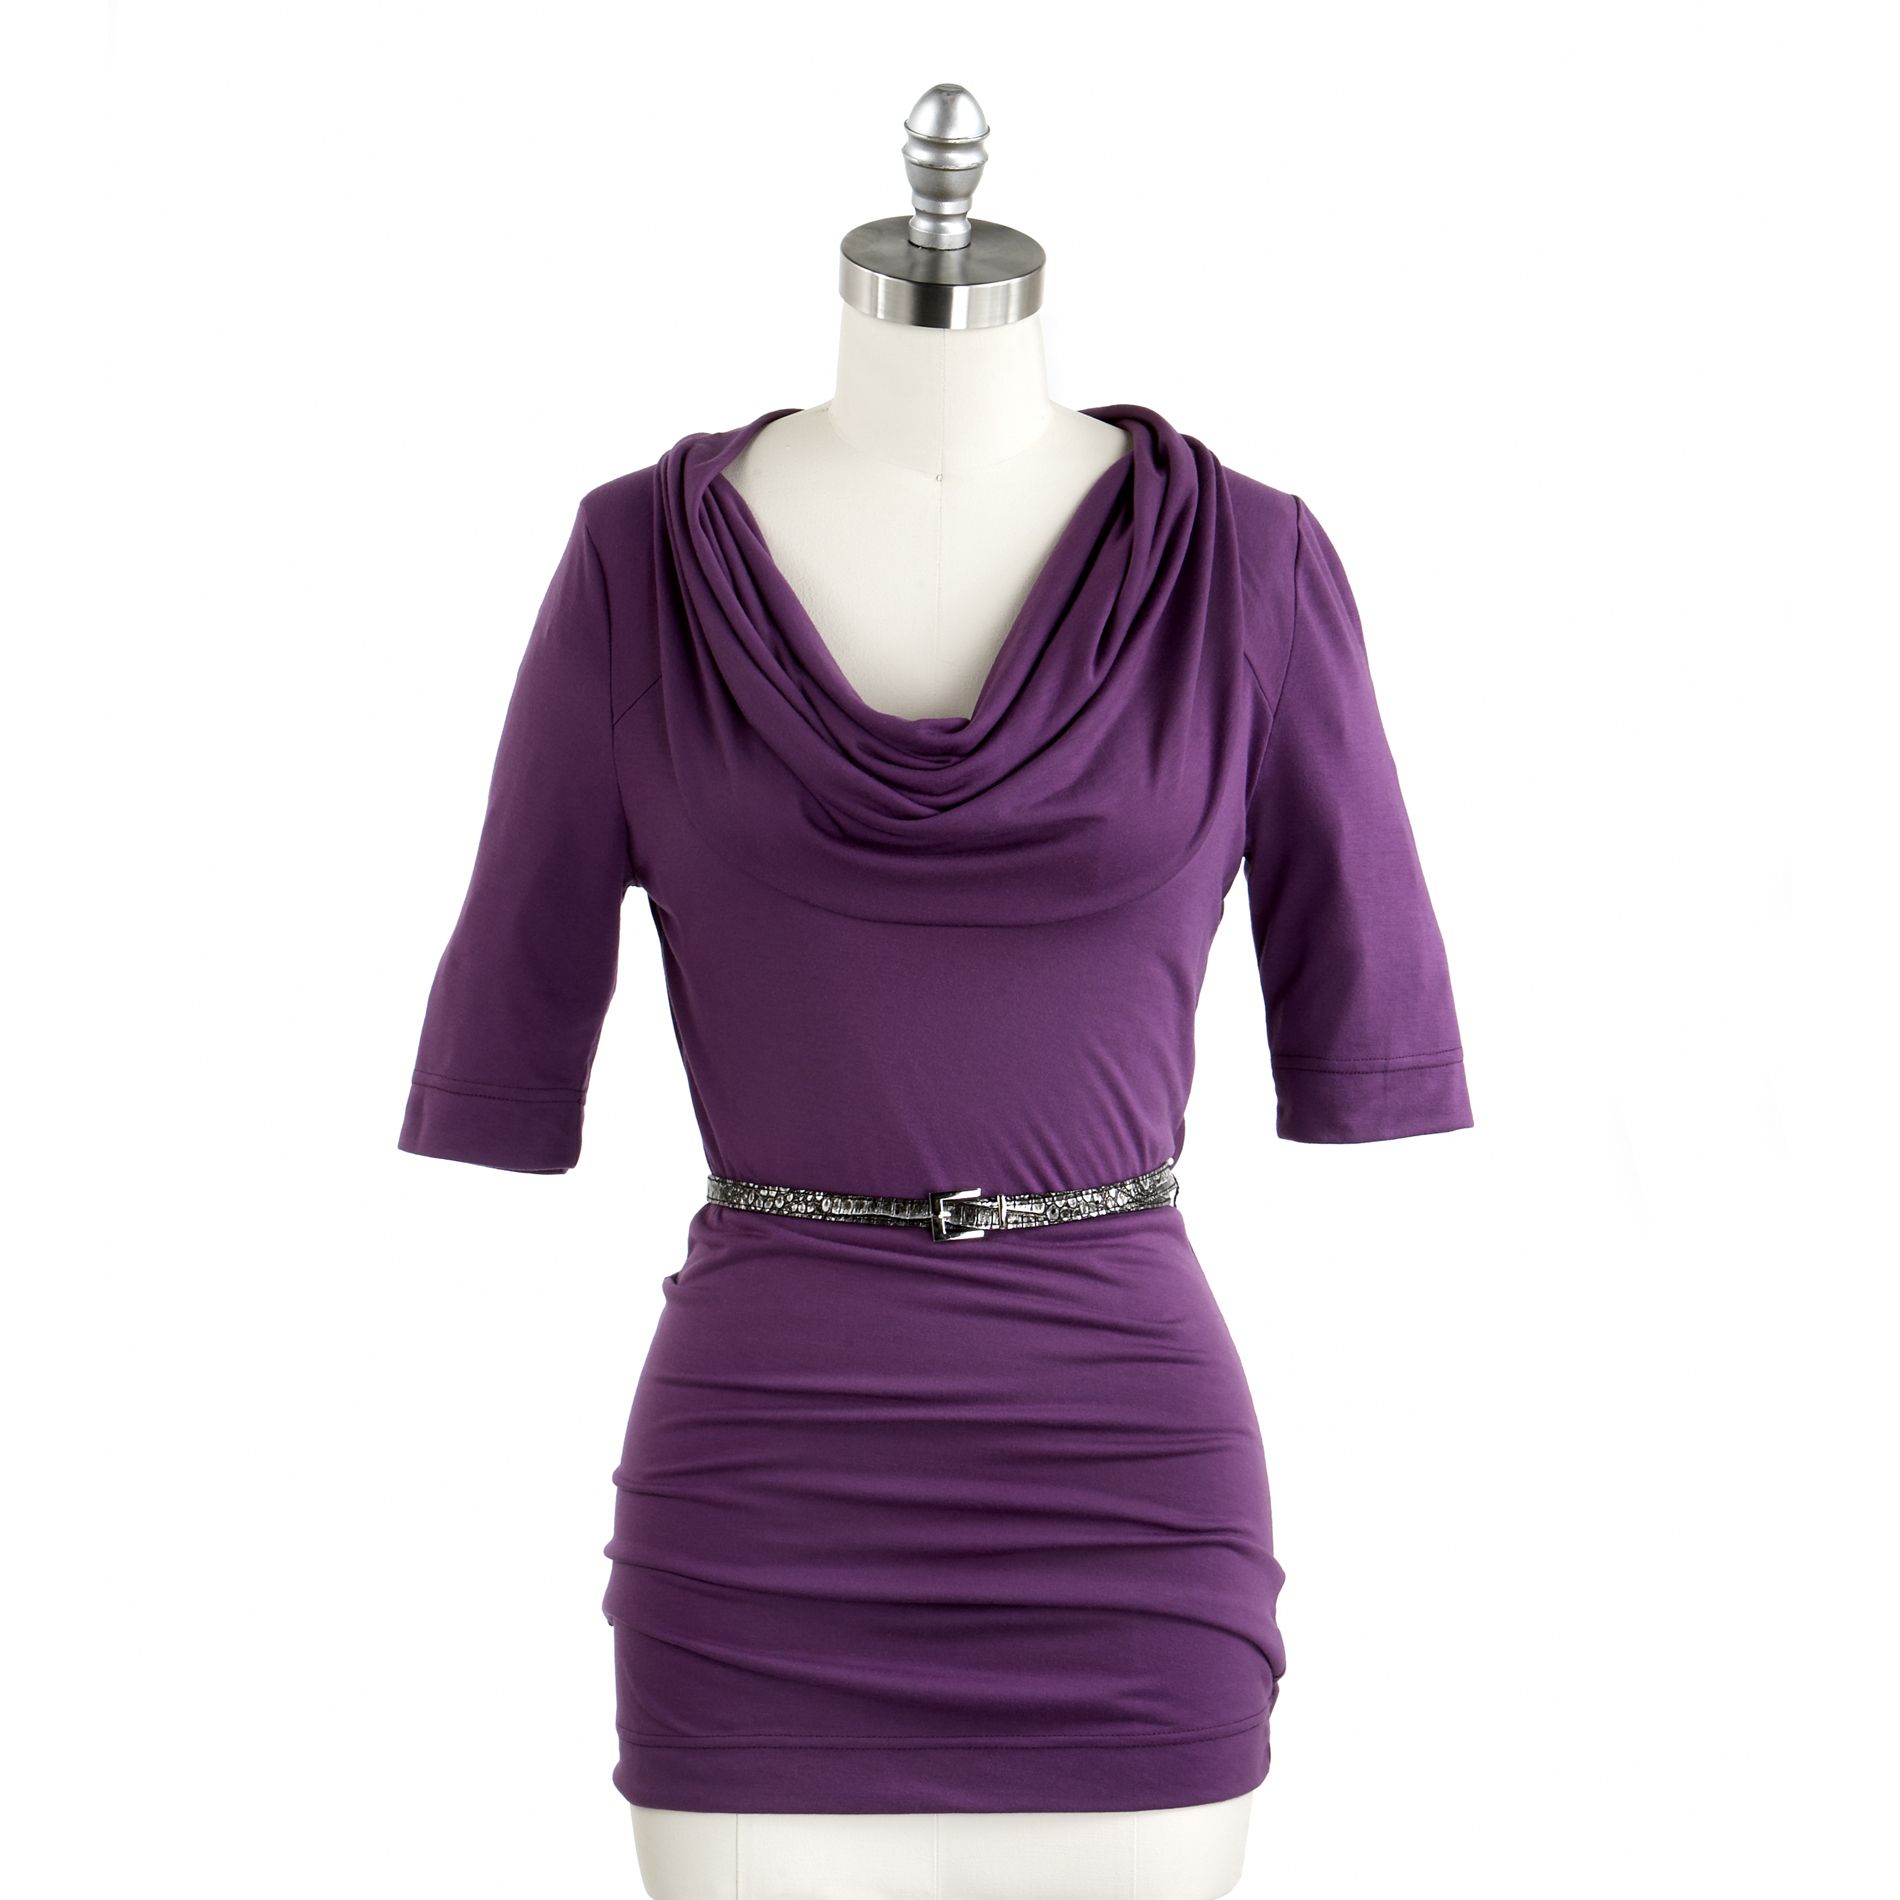 It's Our Time Cowl Neck Tunic with Belt